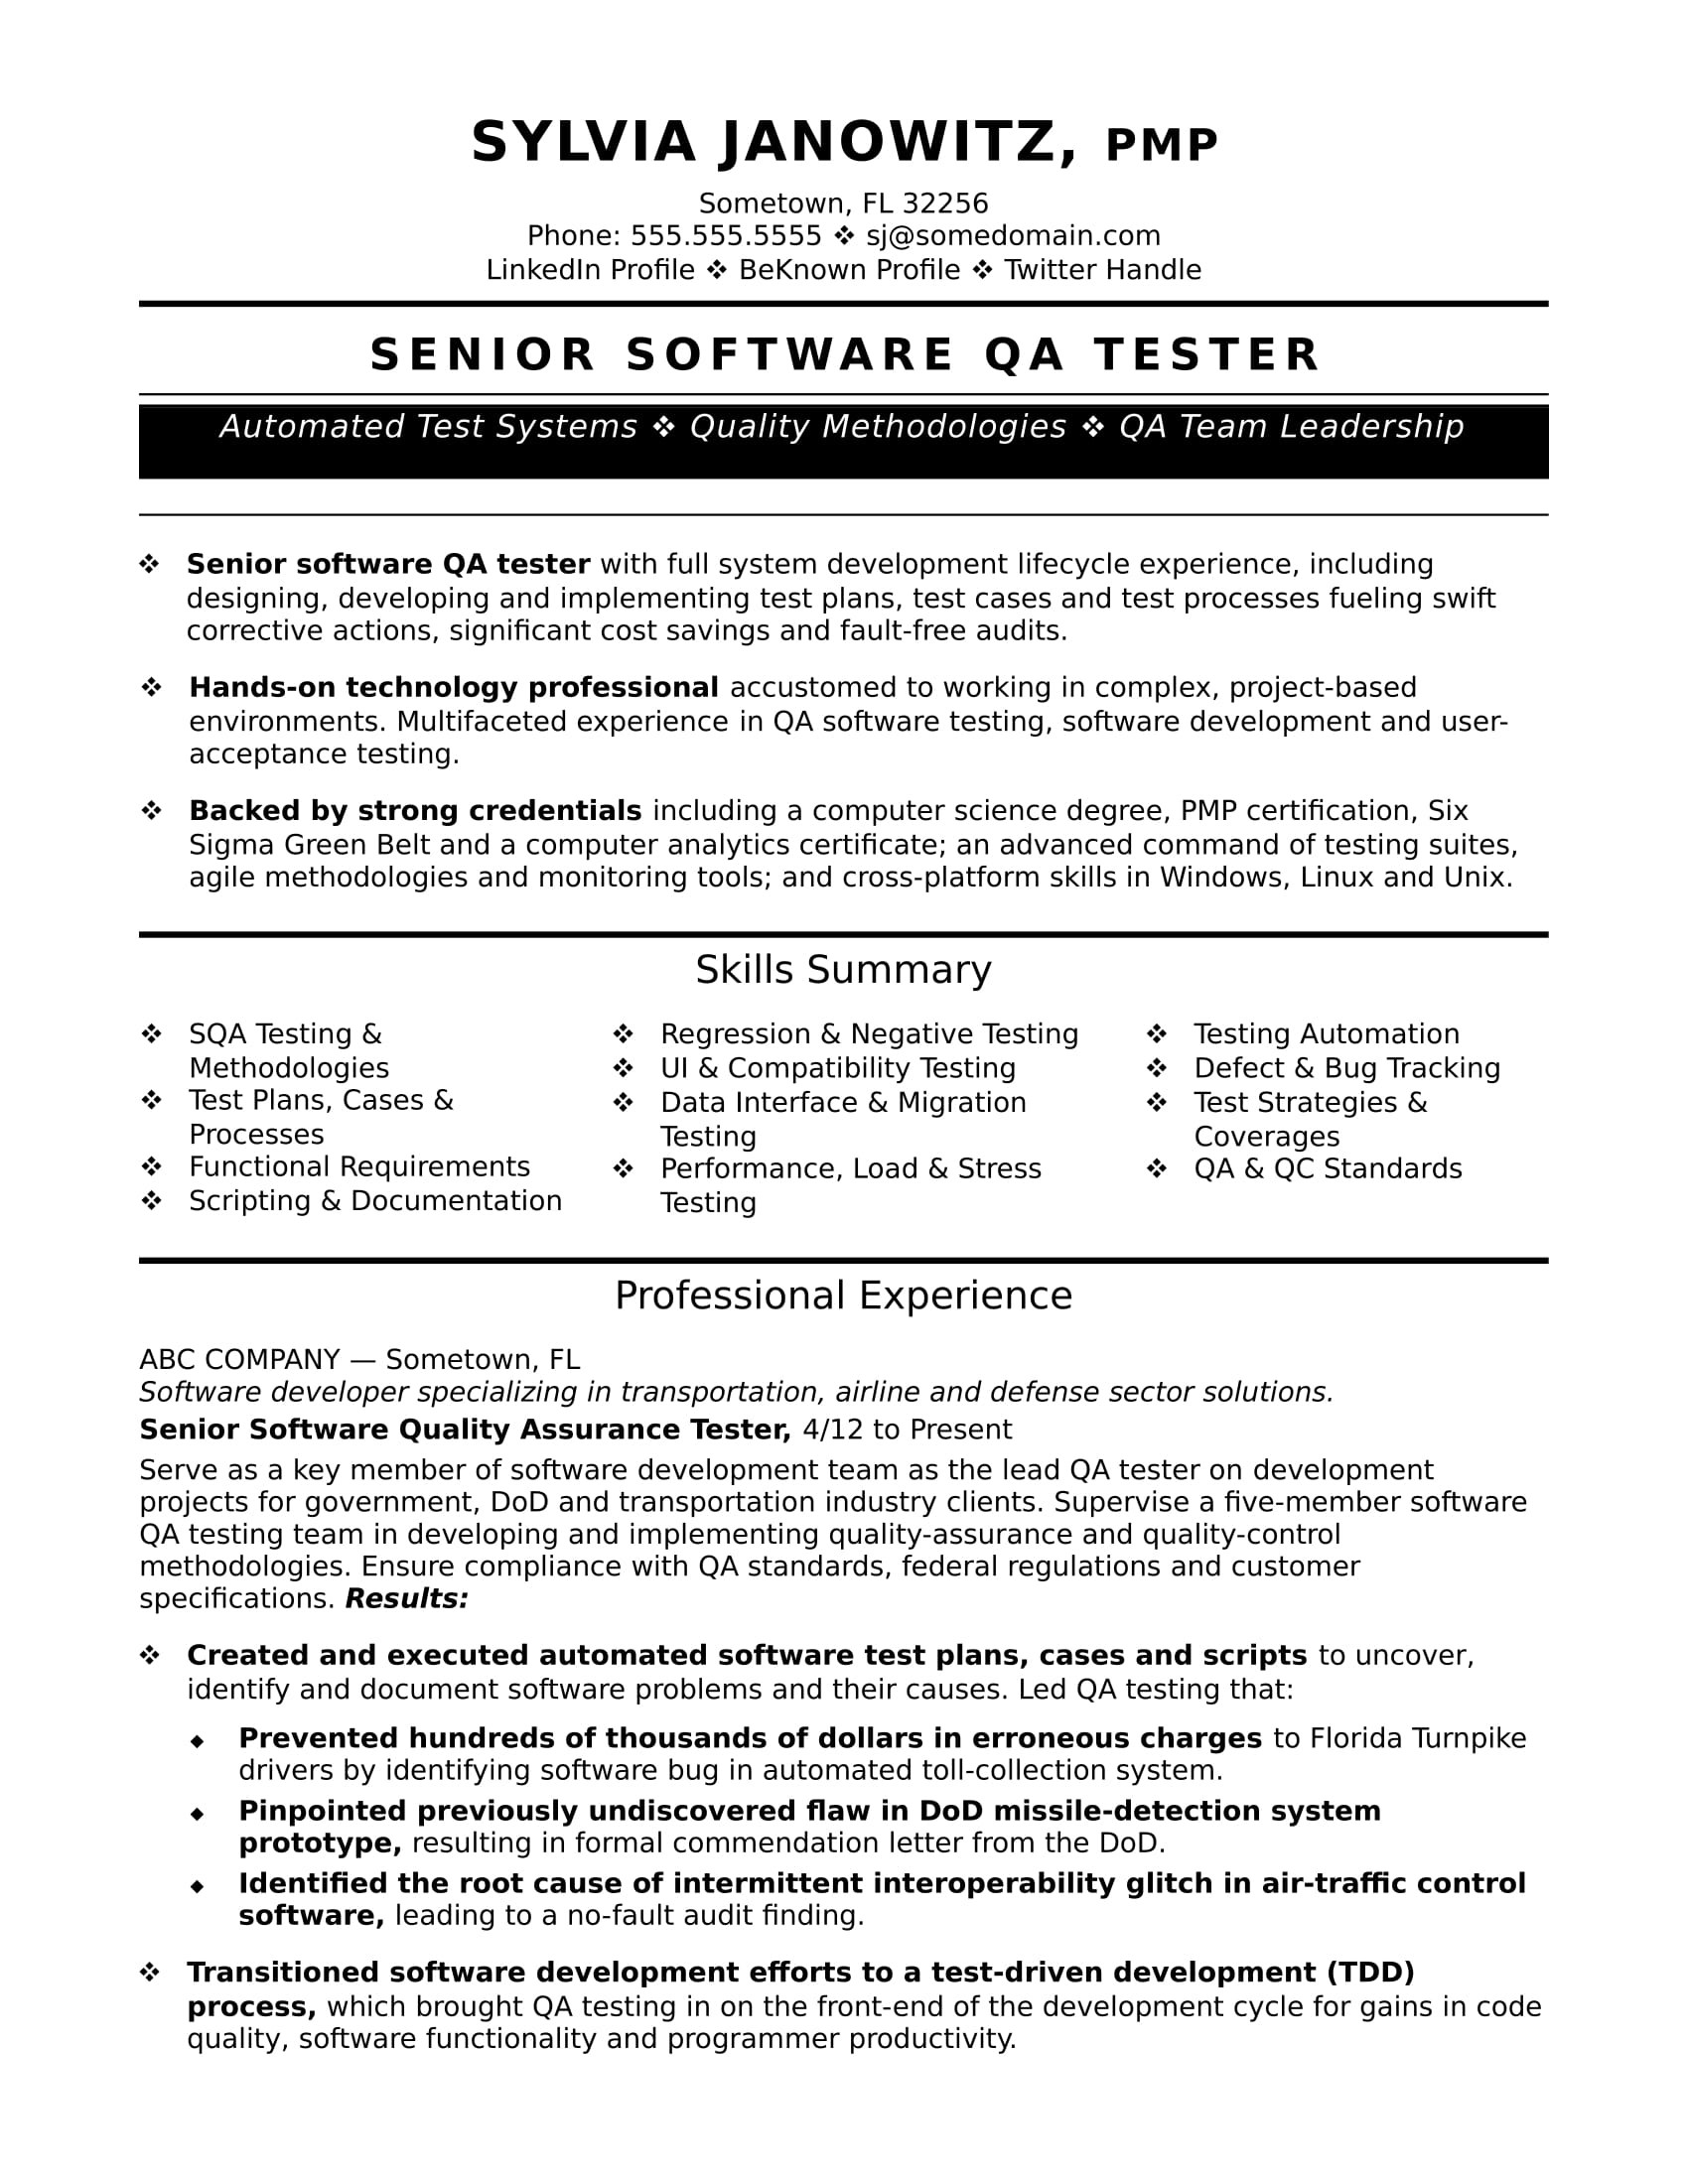 Qtp Sample Resume for software Testers Experienced Qa software Tester Resume Sample Monster.com